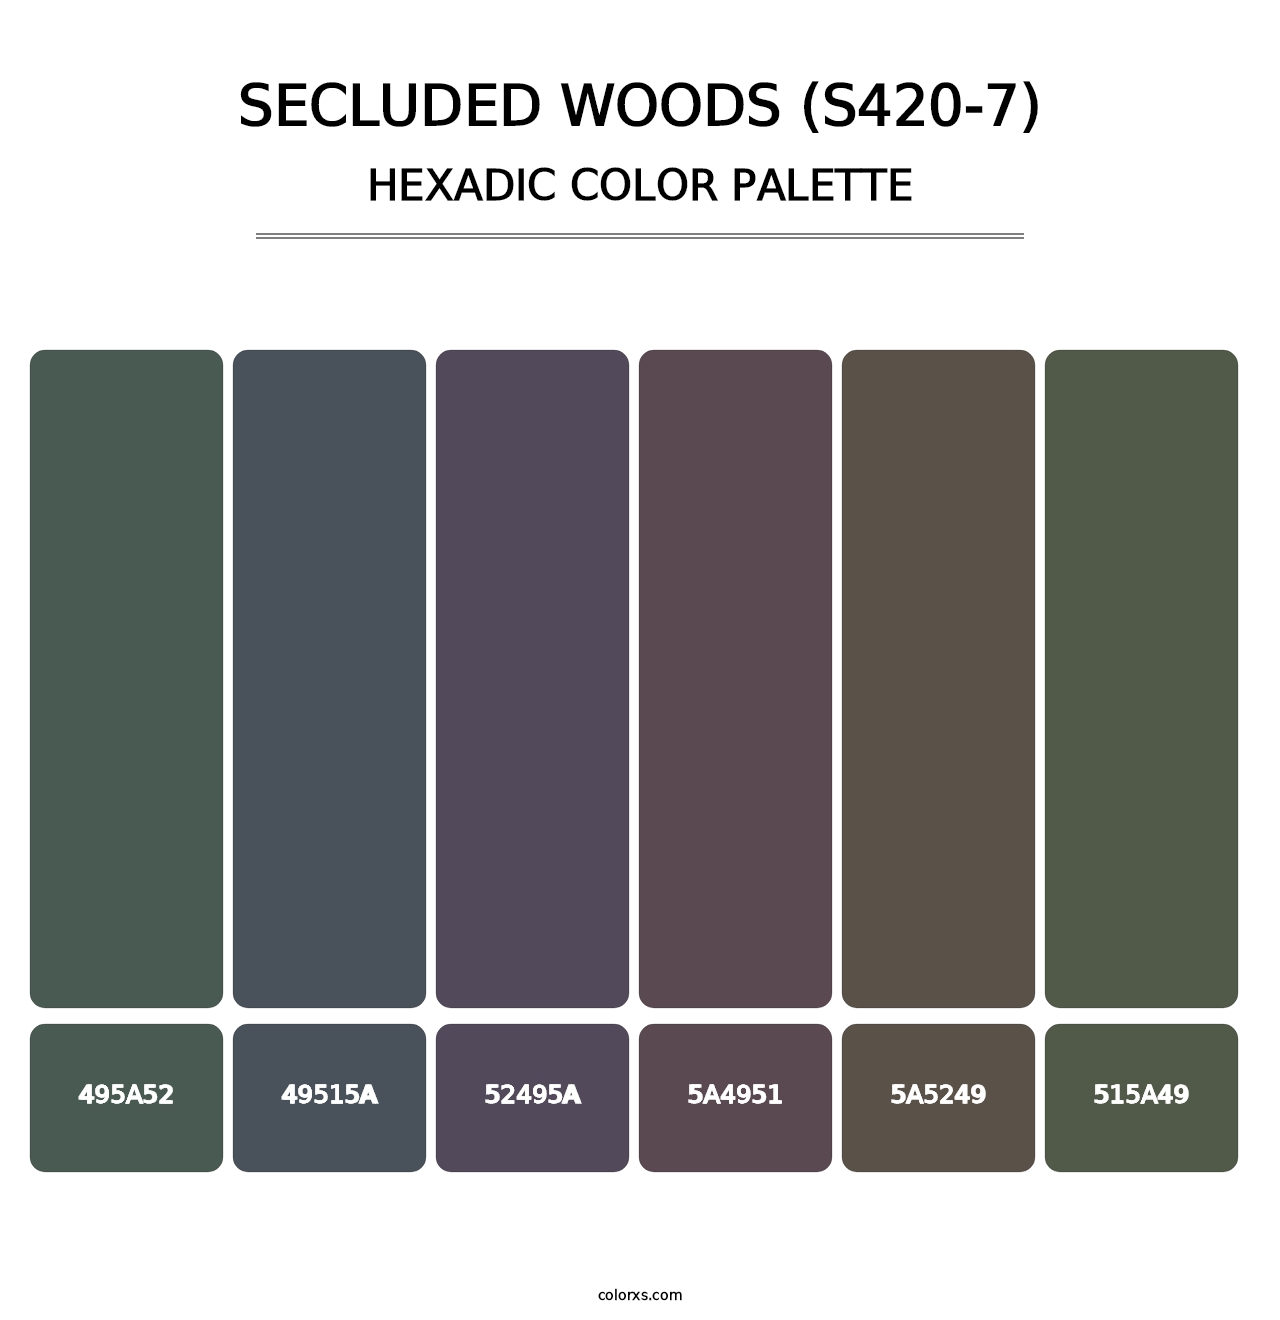 Secluded Woods (S420-7) - Hexadic Color Palette